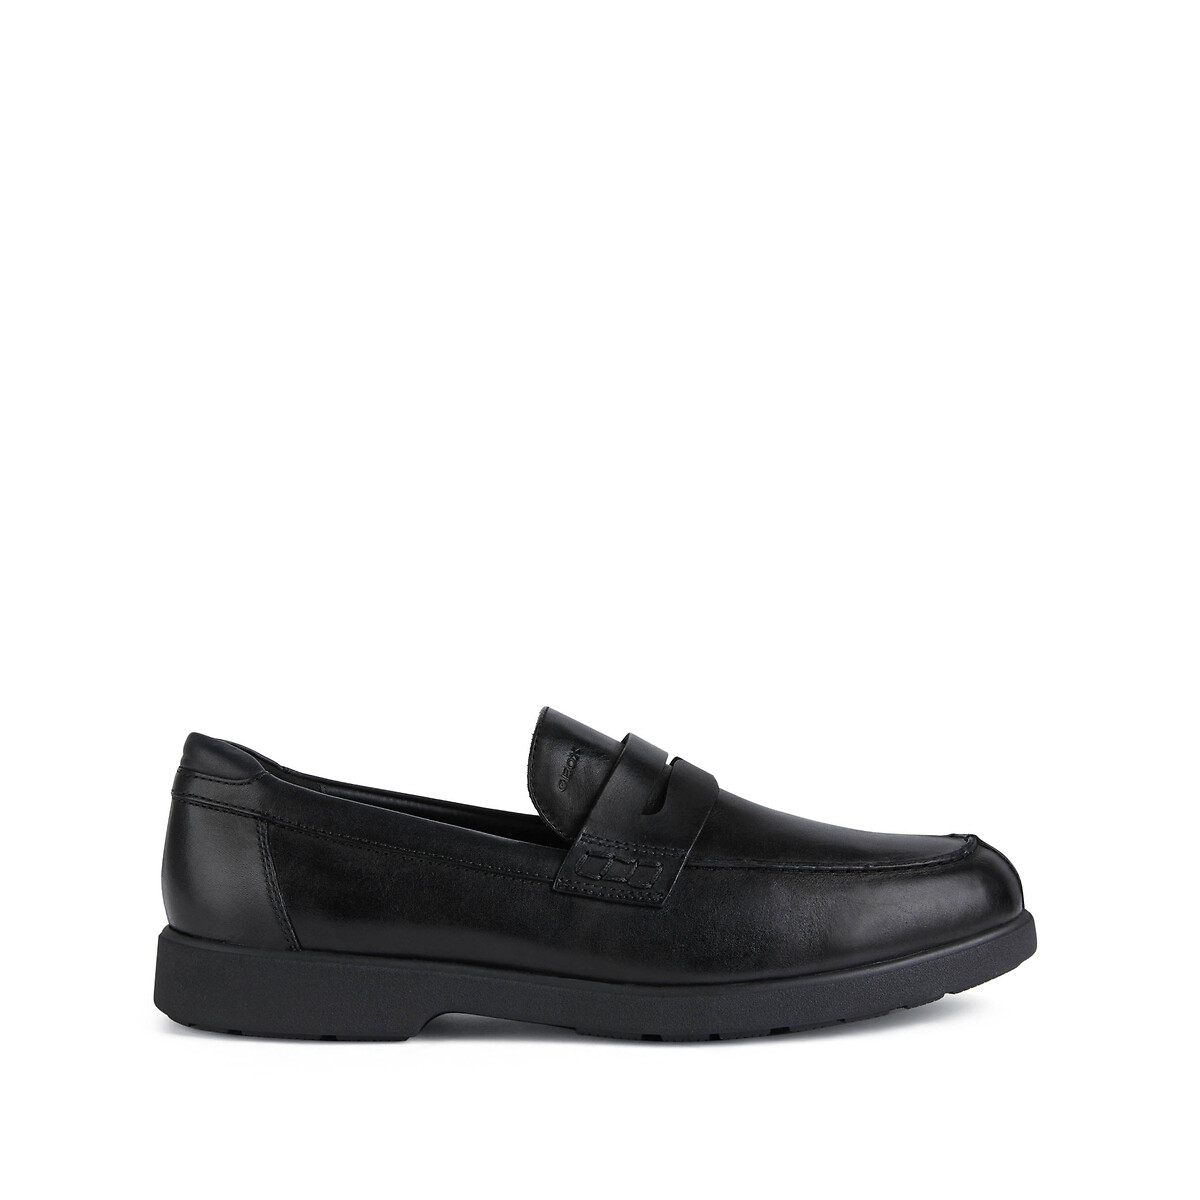 Spherica EC11 Loafers in Breathable Leather